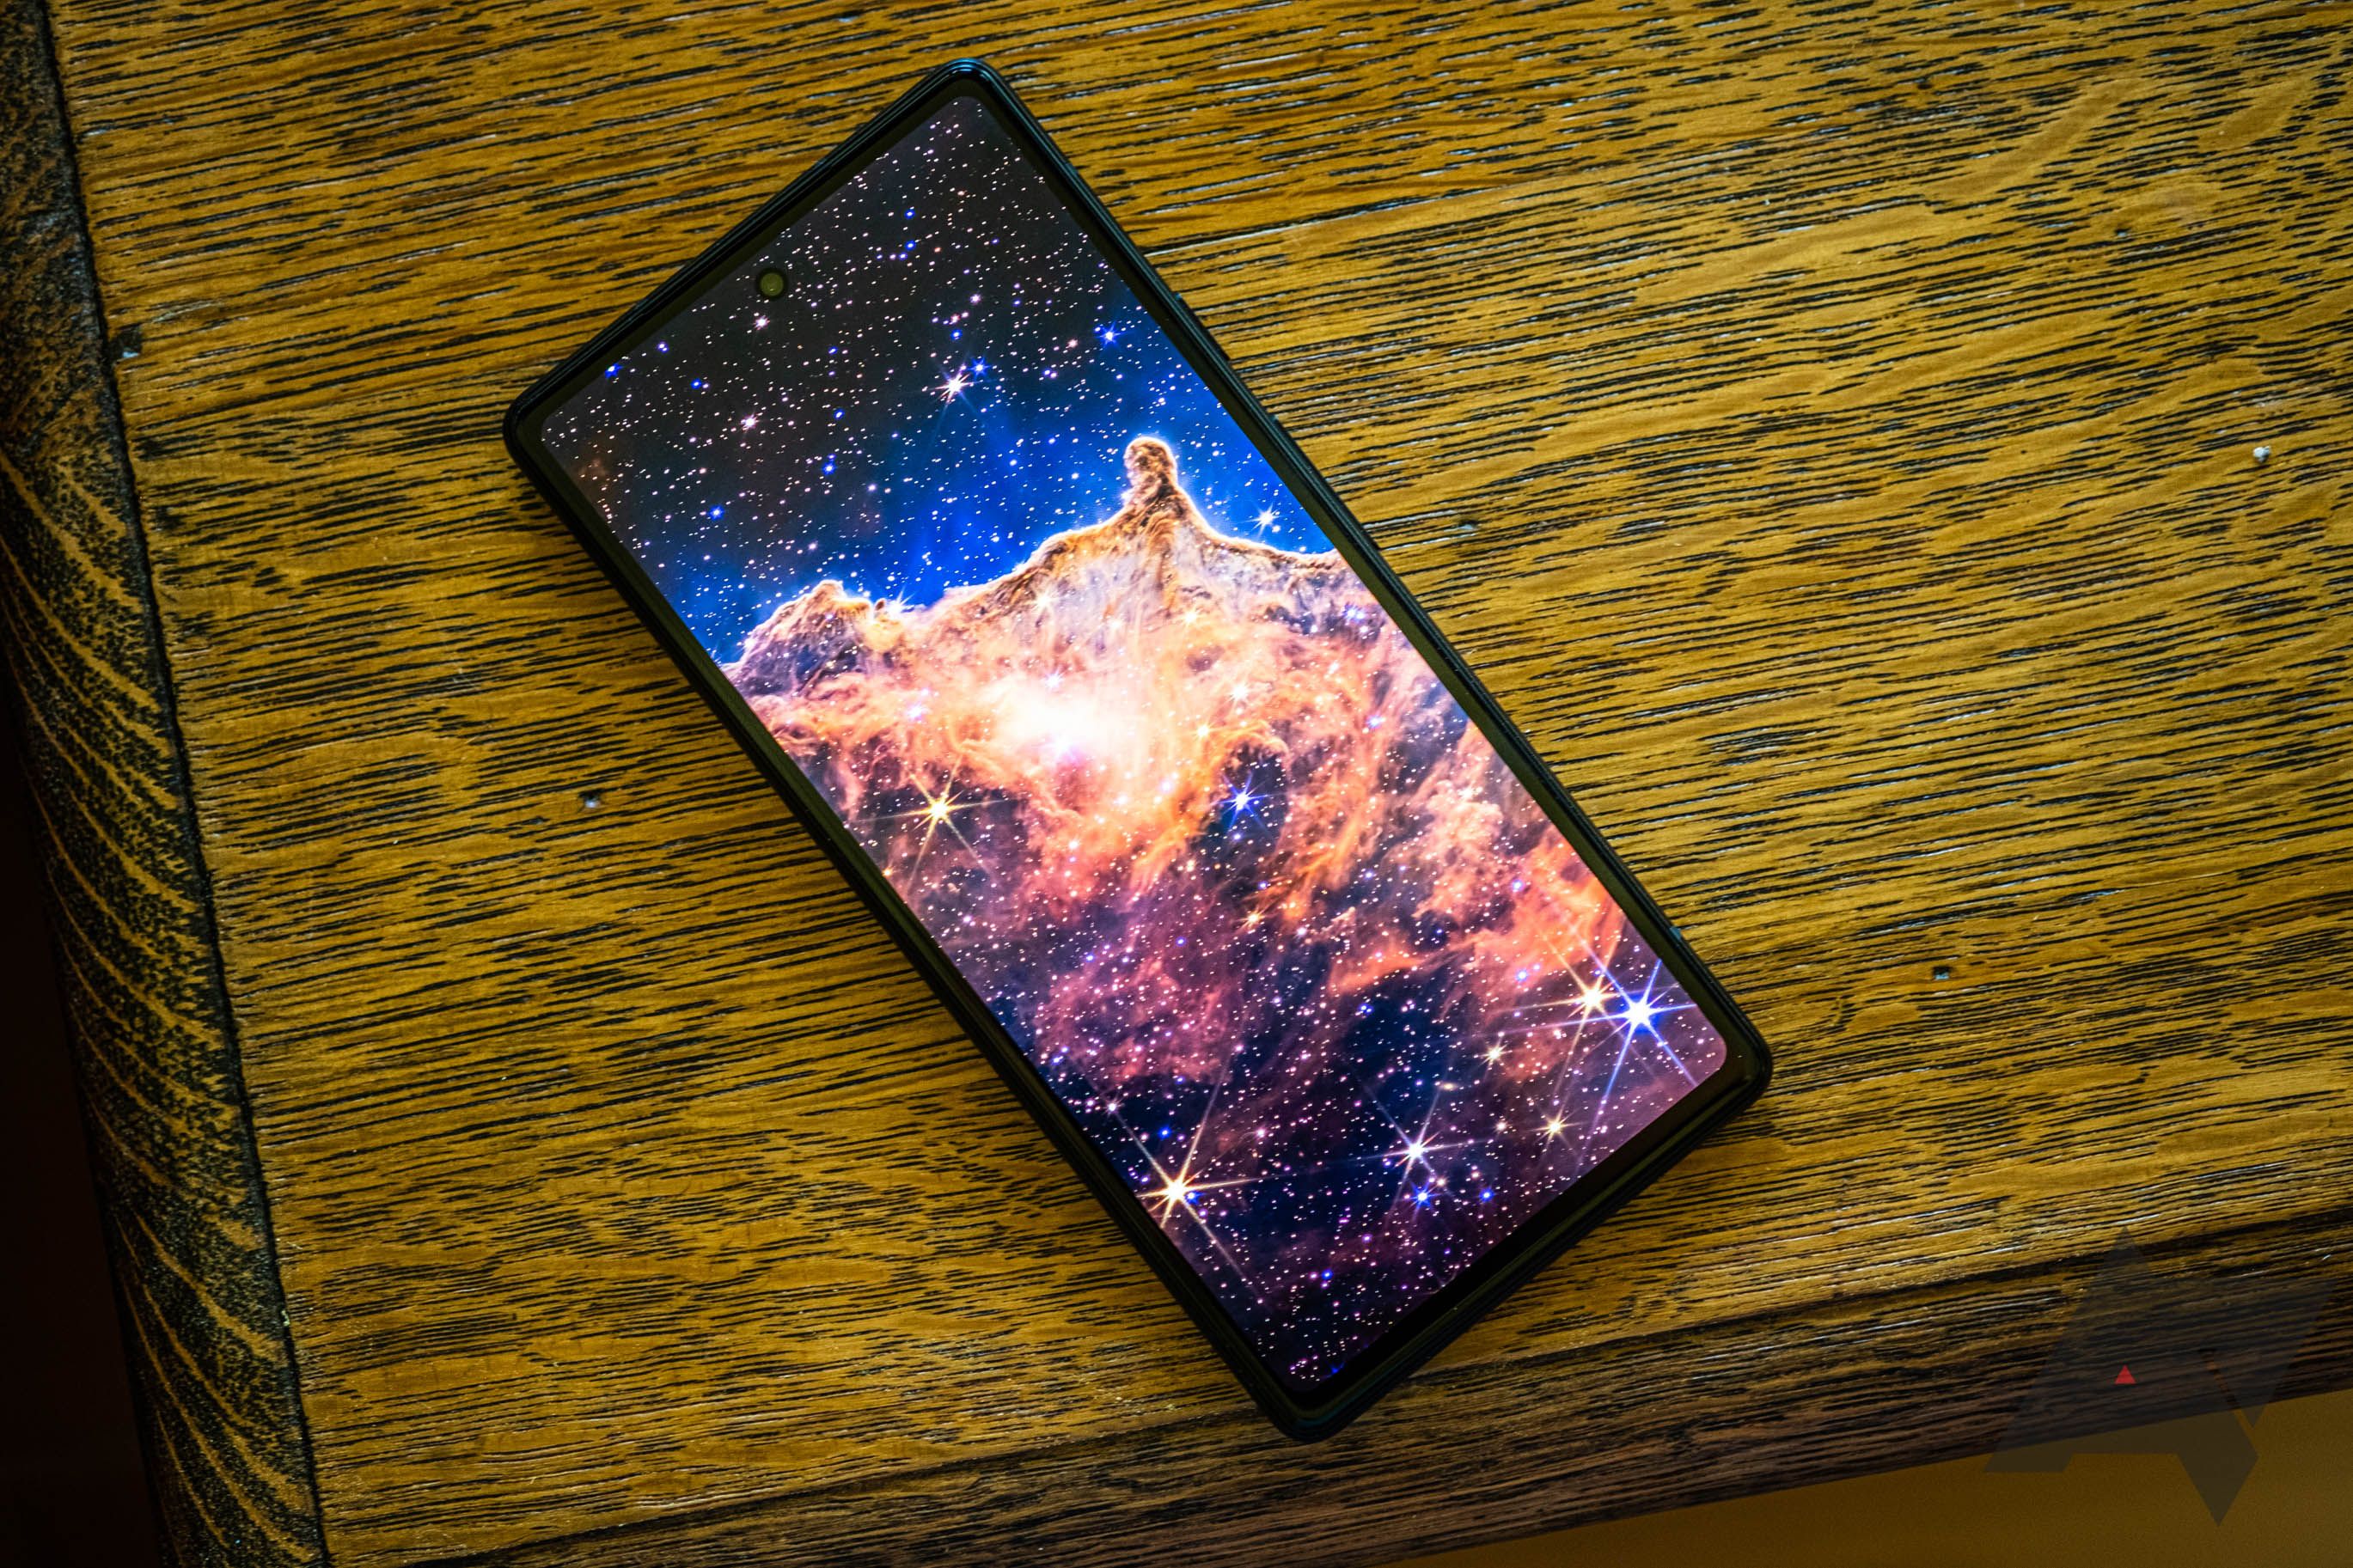 The Google Pixel 6a sitting on a wooden surface